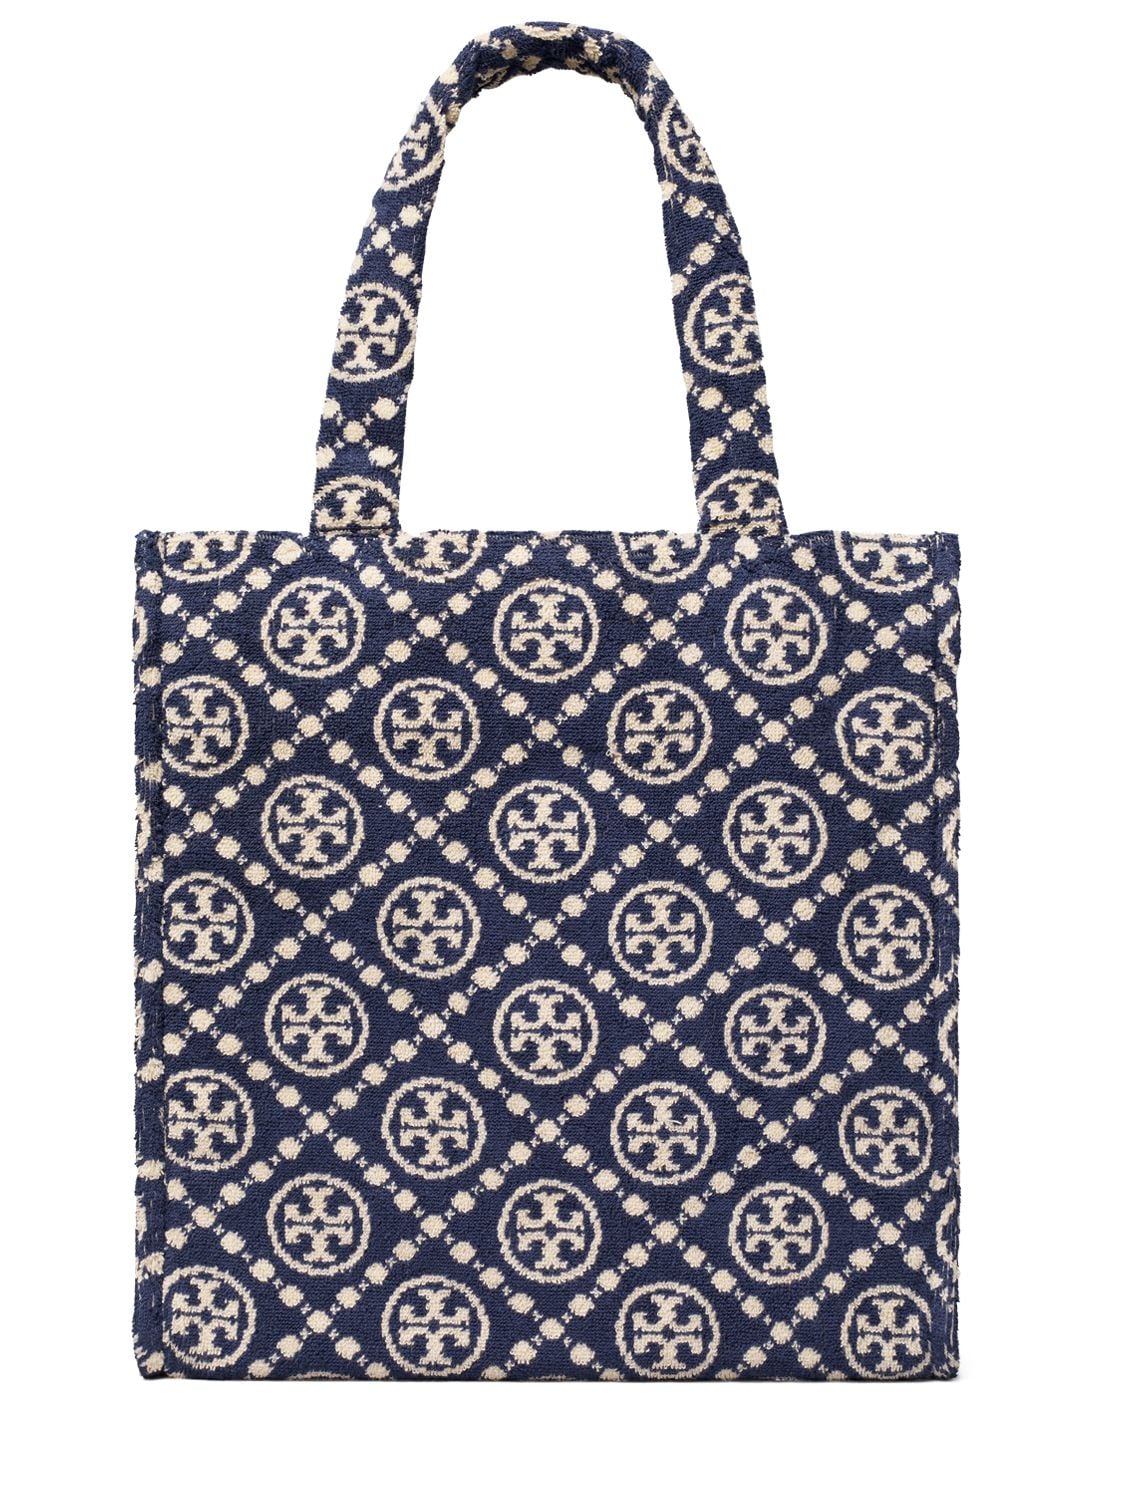 TORY BURCH T MONOGRAM COTTON TERRY TOTE BAG